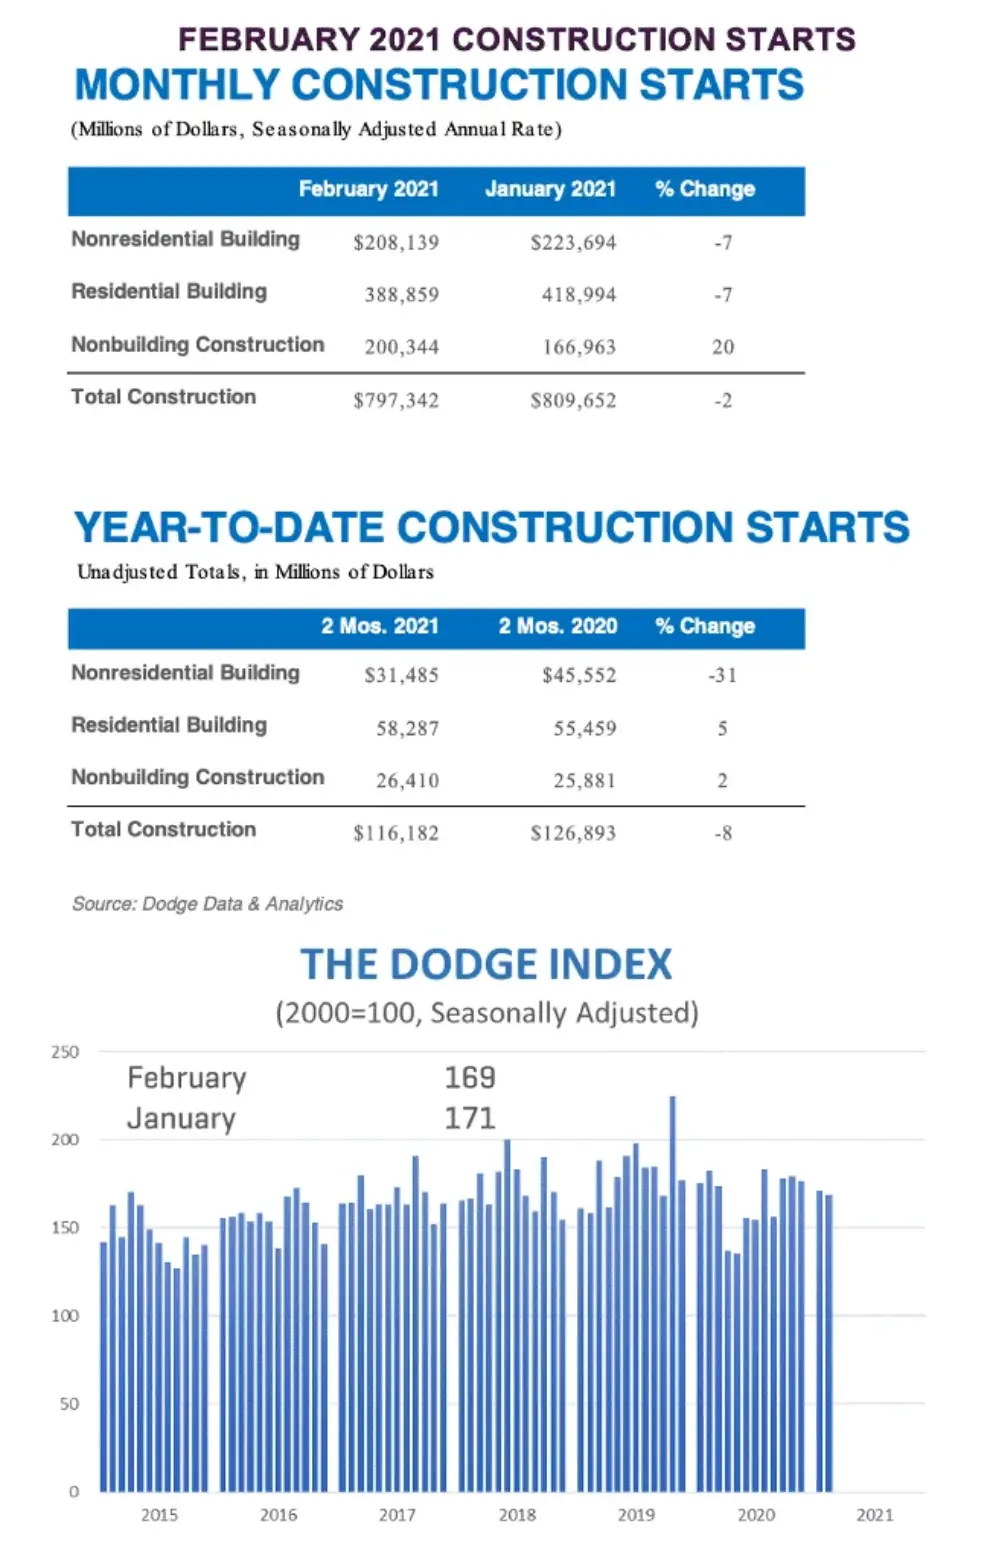 Despite Hope for Strong Economic Recovery, February Sees Further Decline in National Construction Starts